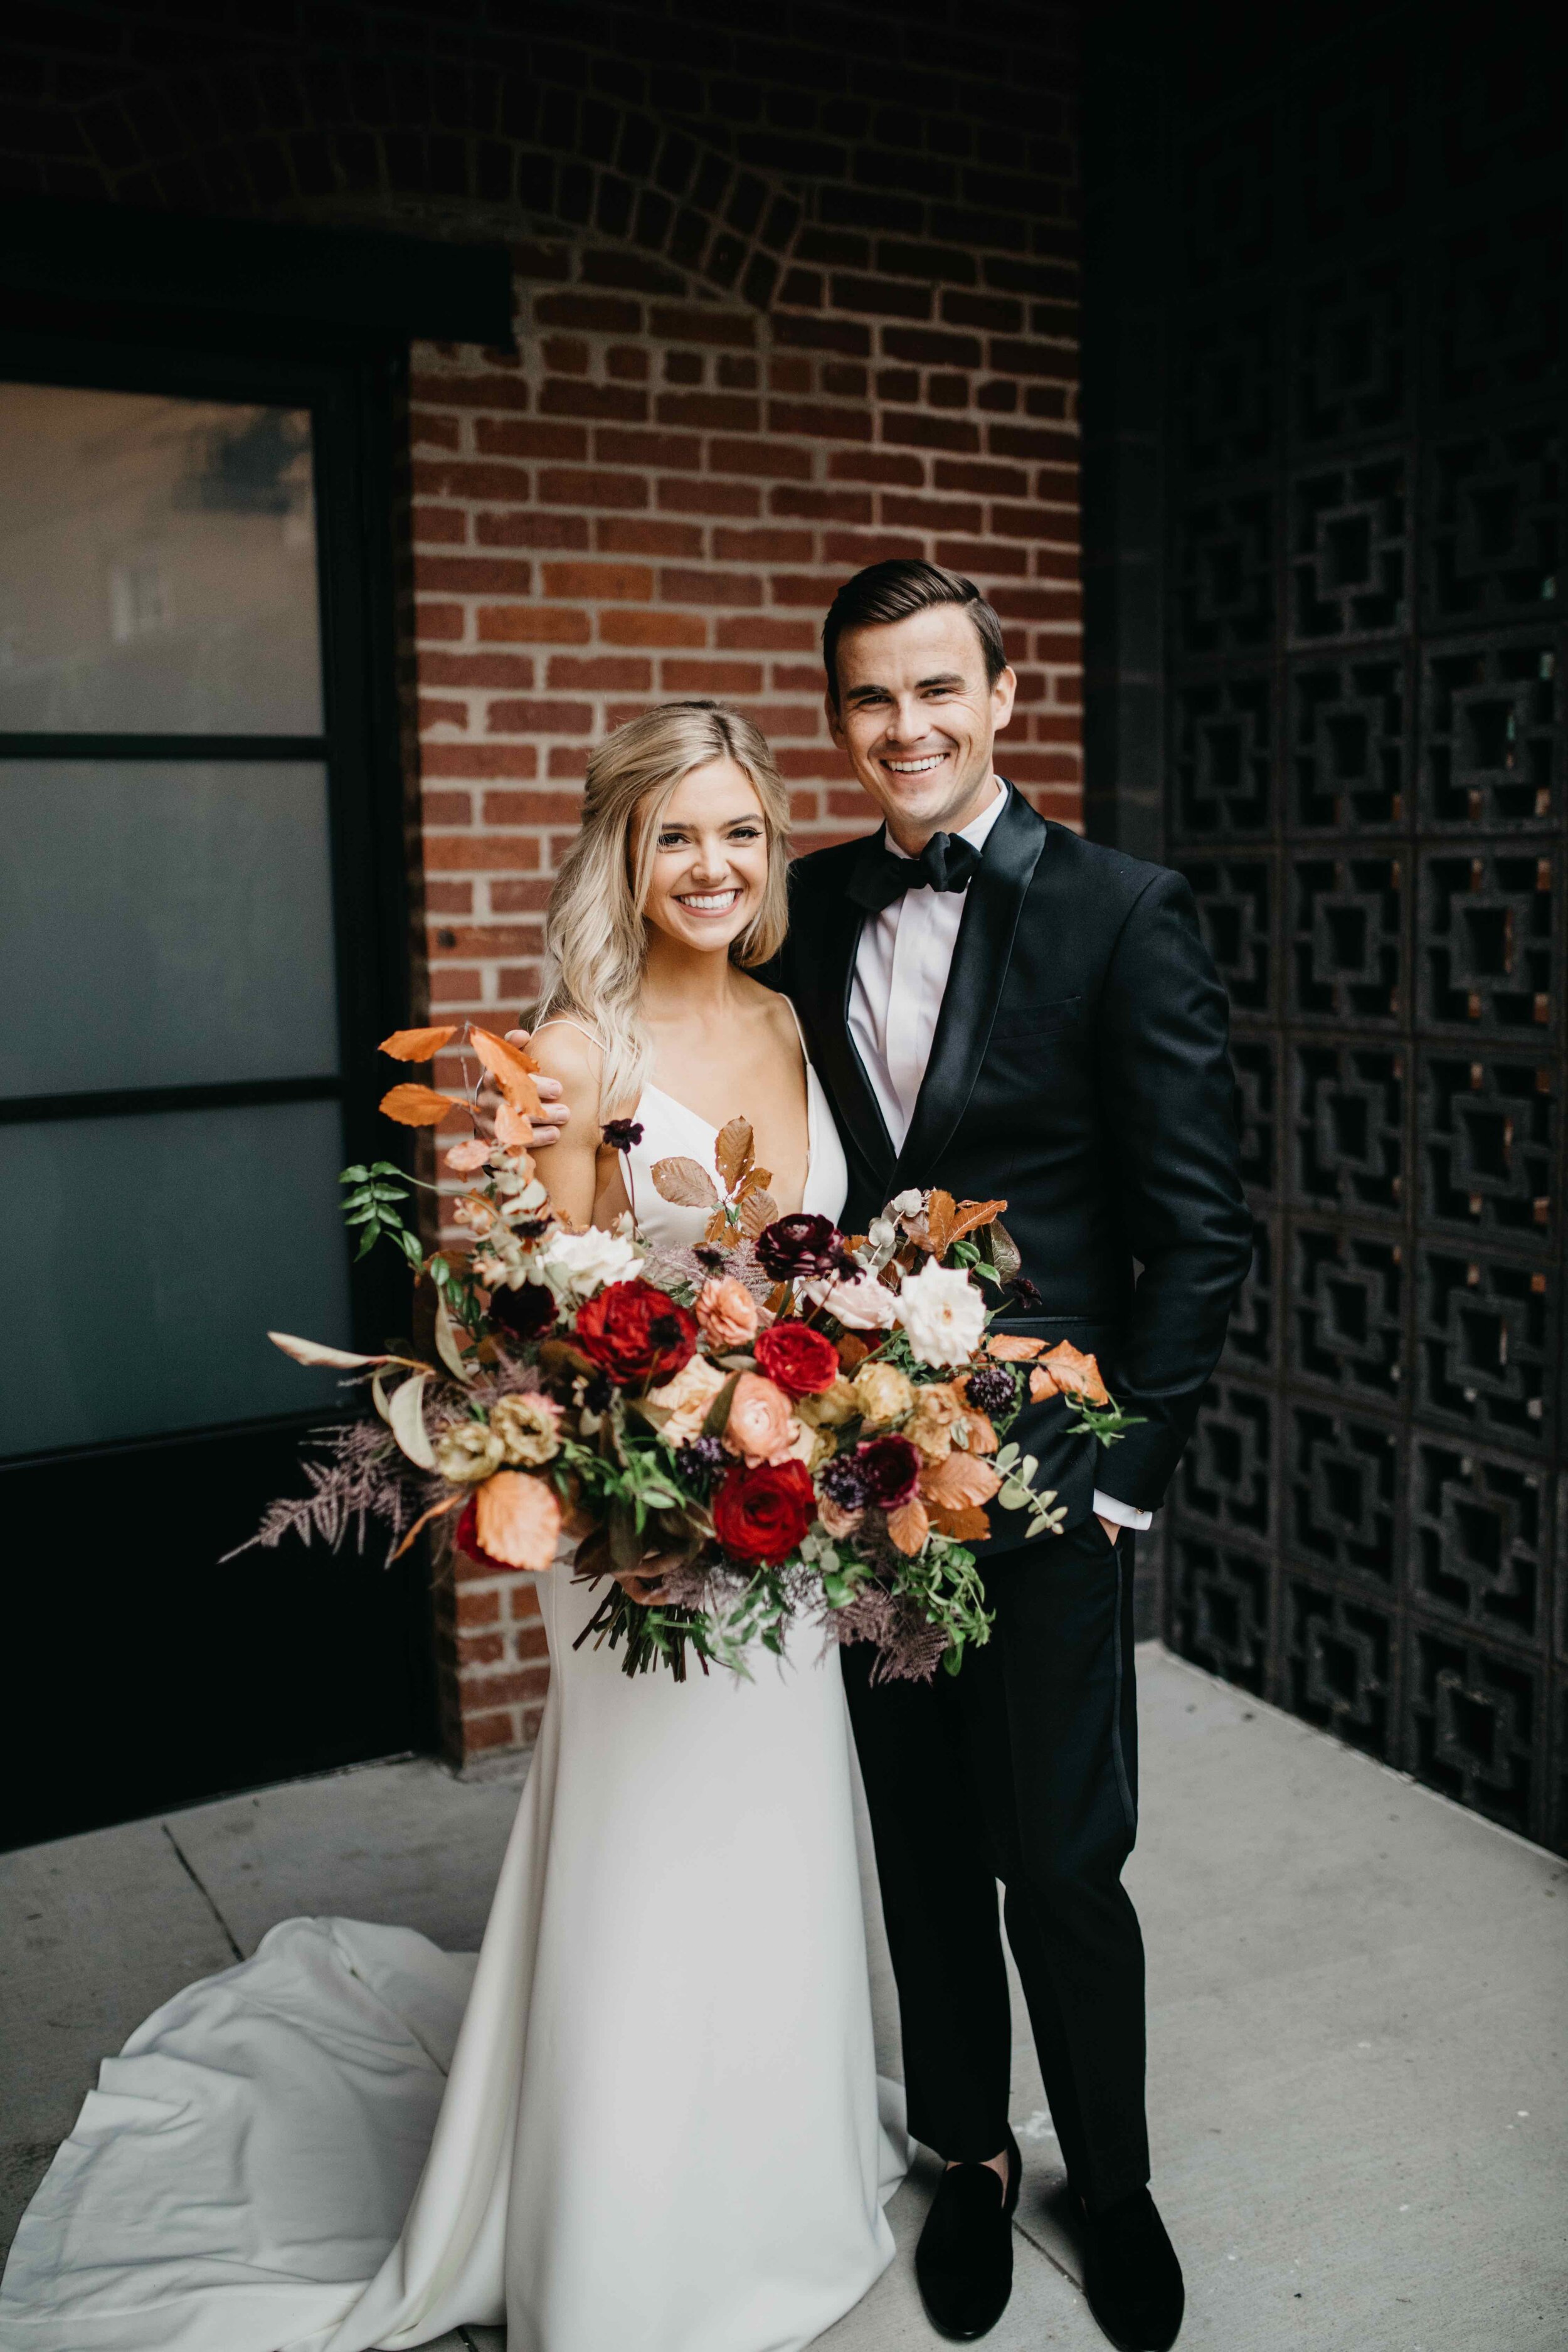 Jess + Scott: Lush Fall Wedding Floral Design at Clementine in ...